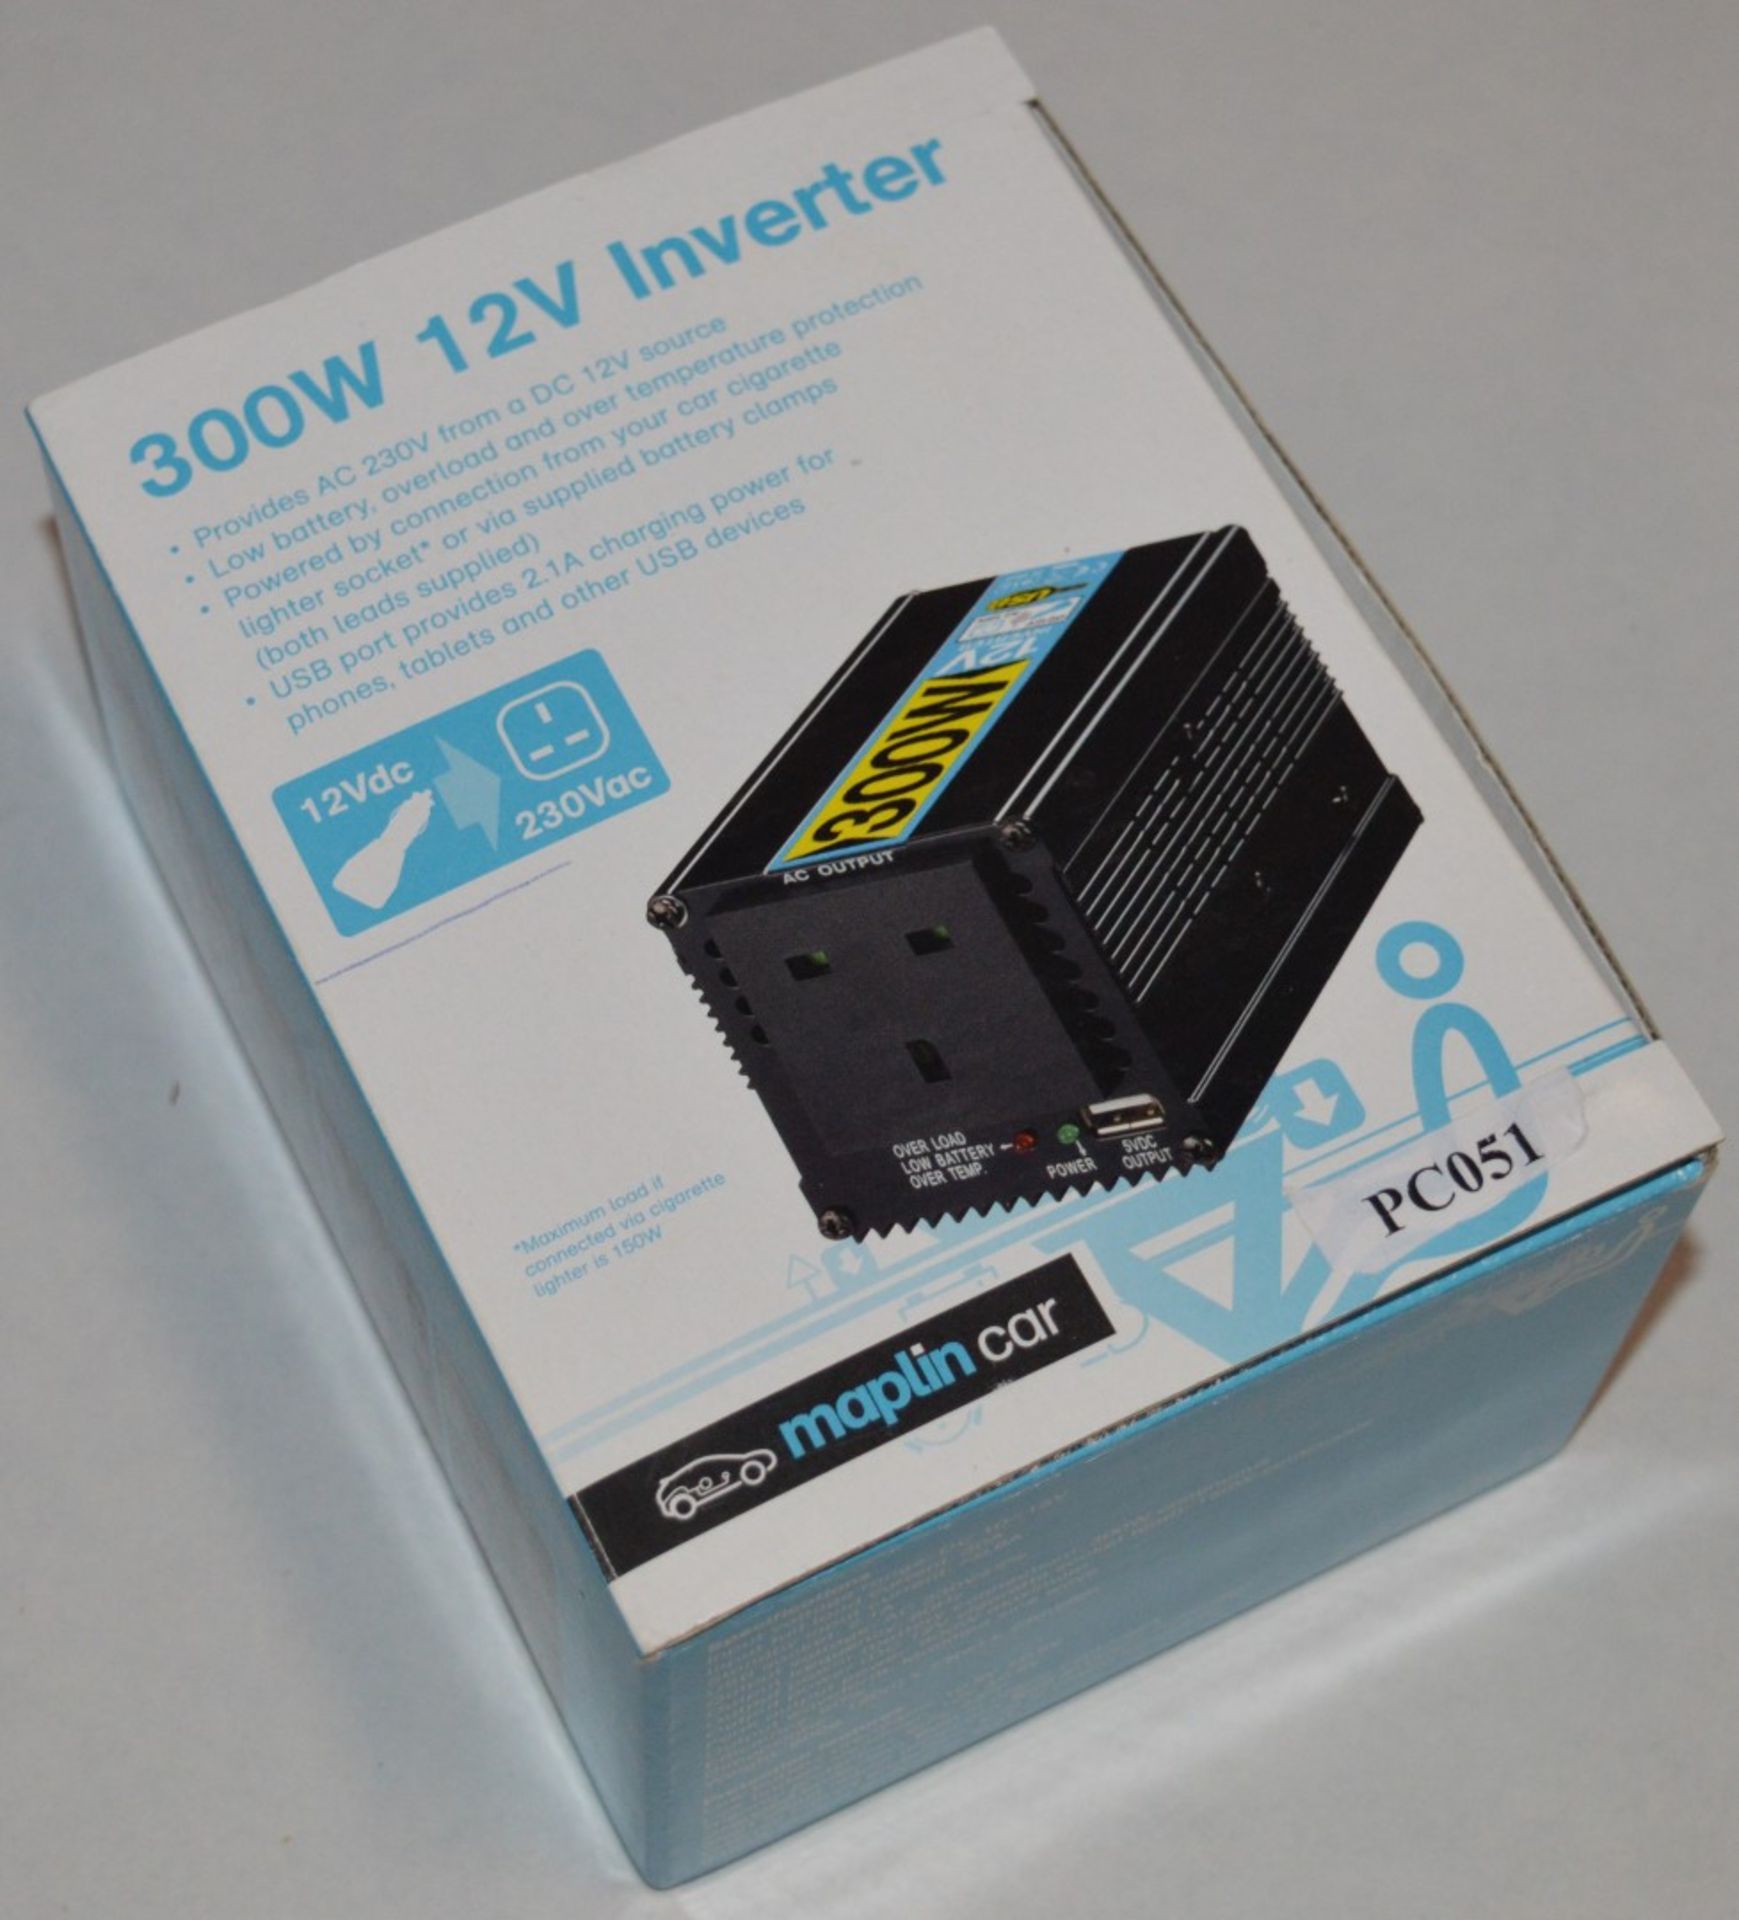 1 x Maplin 300w 12v Inverter - Boxed in Excellent Condition - Provides AC 239v From DC 12v